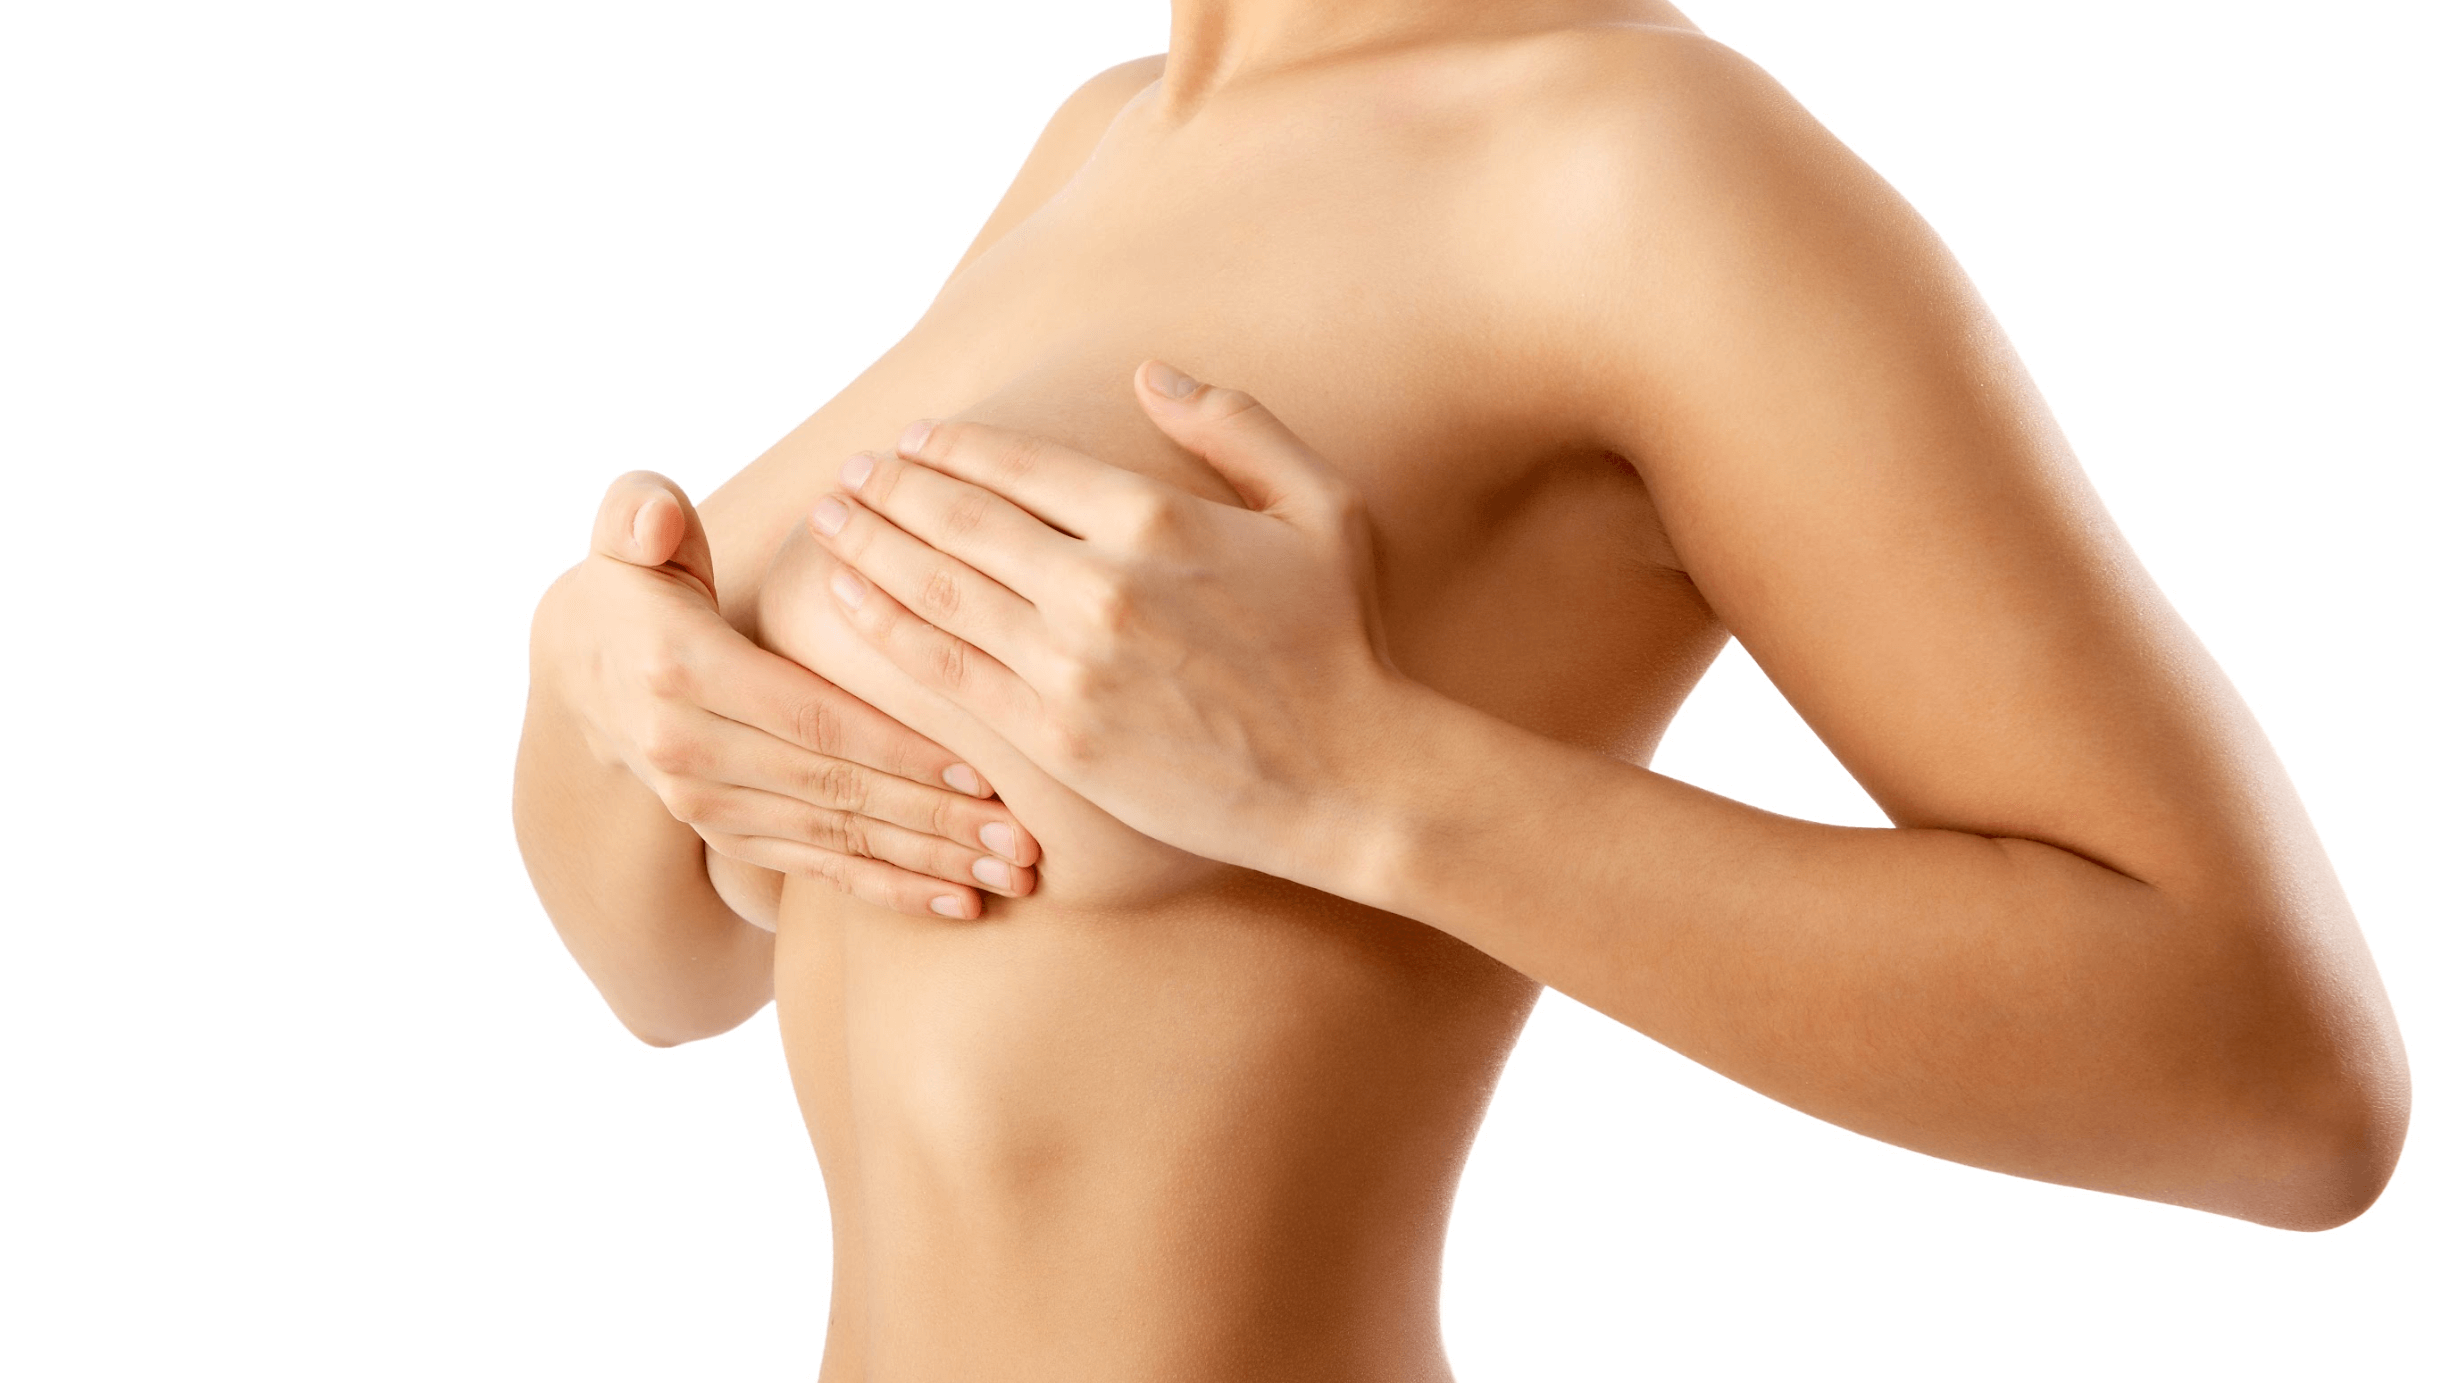 Will I Have Visible Scars After Breast Augmentation Surgery?